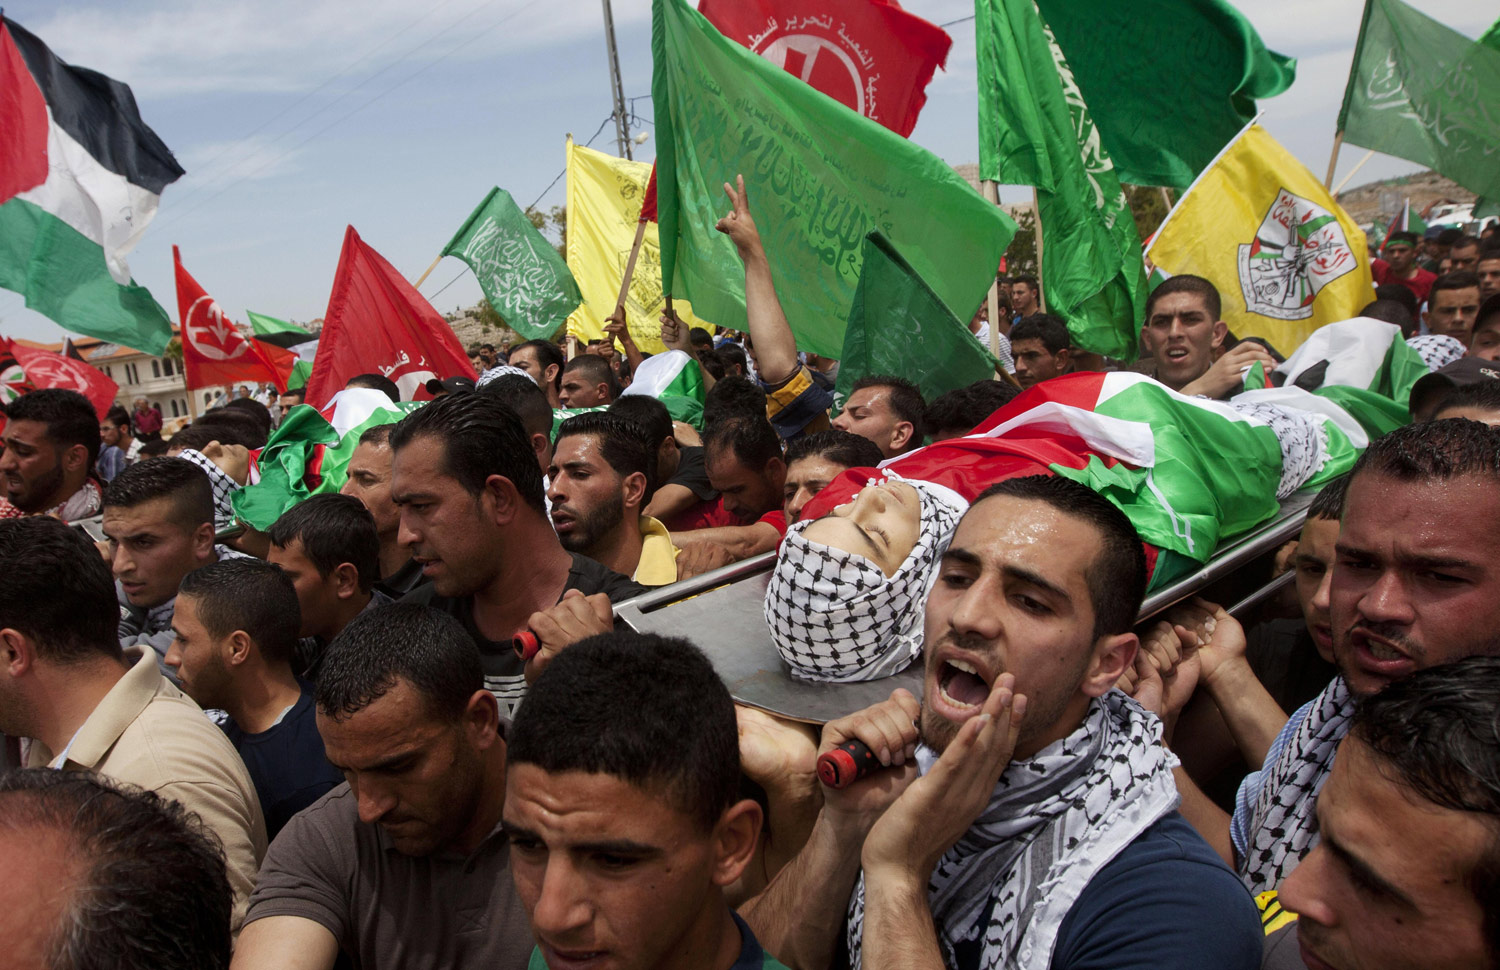 On ‘Lost Causes’ and the Future of Palestine